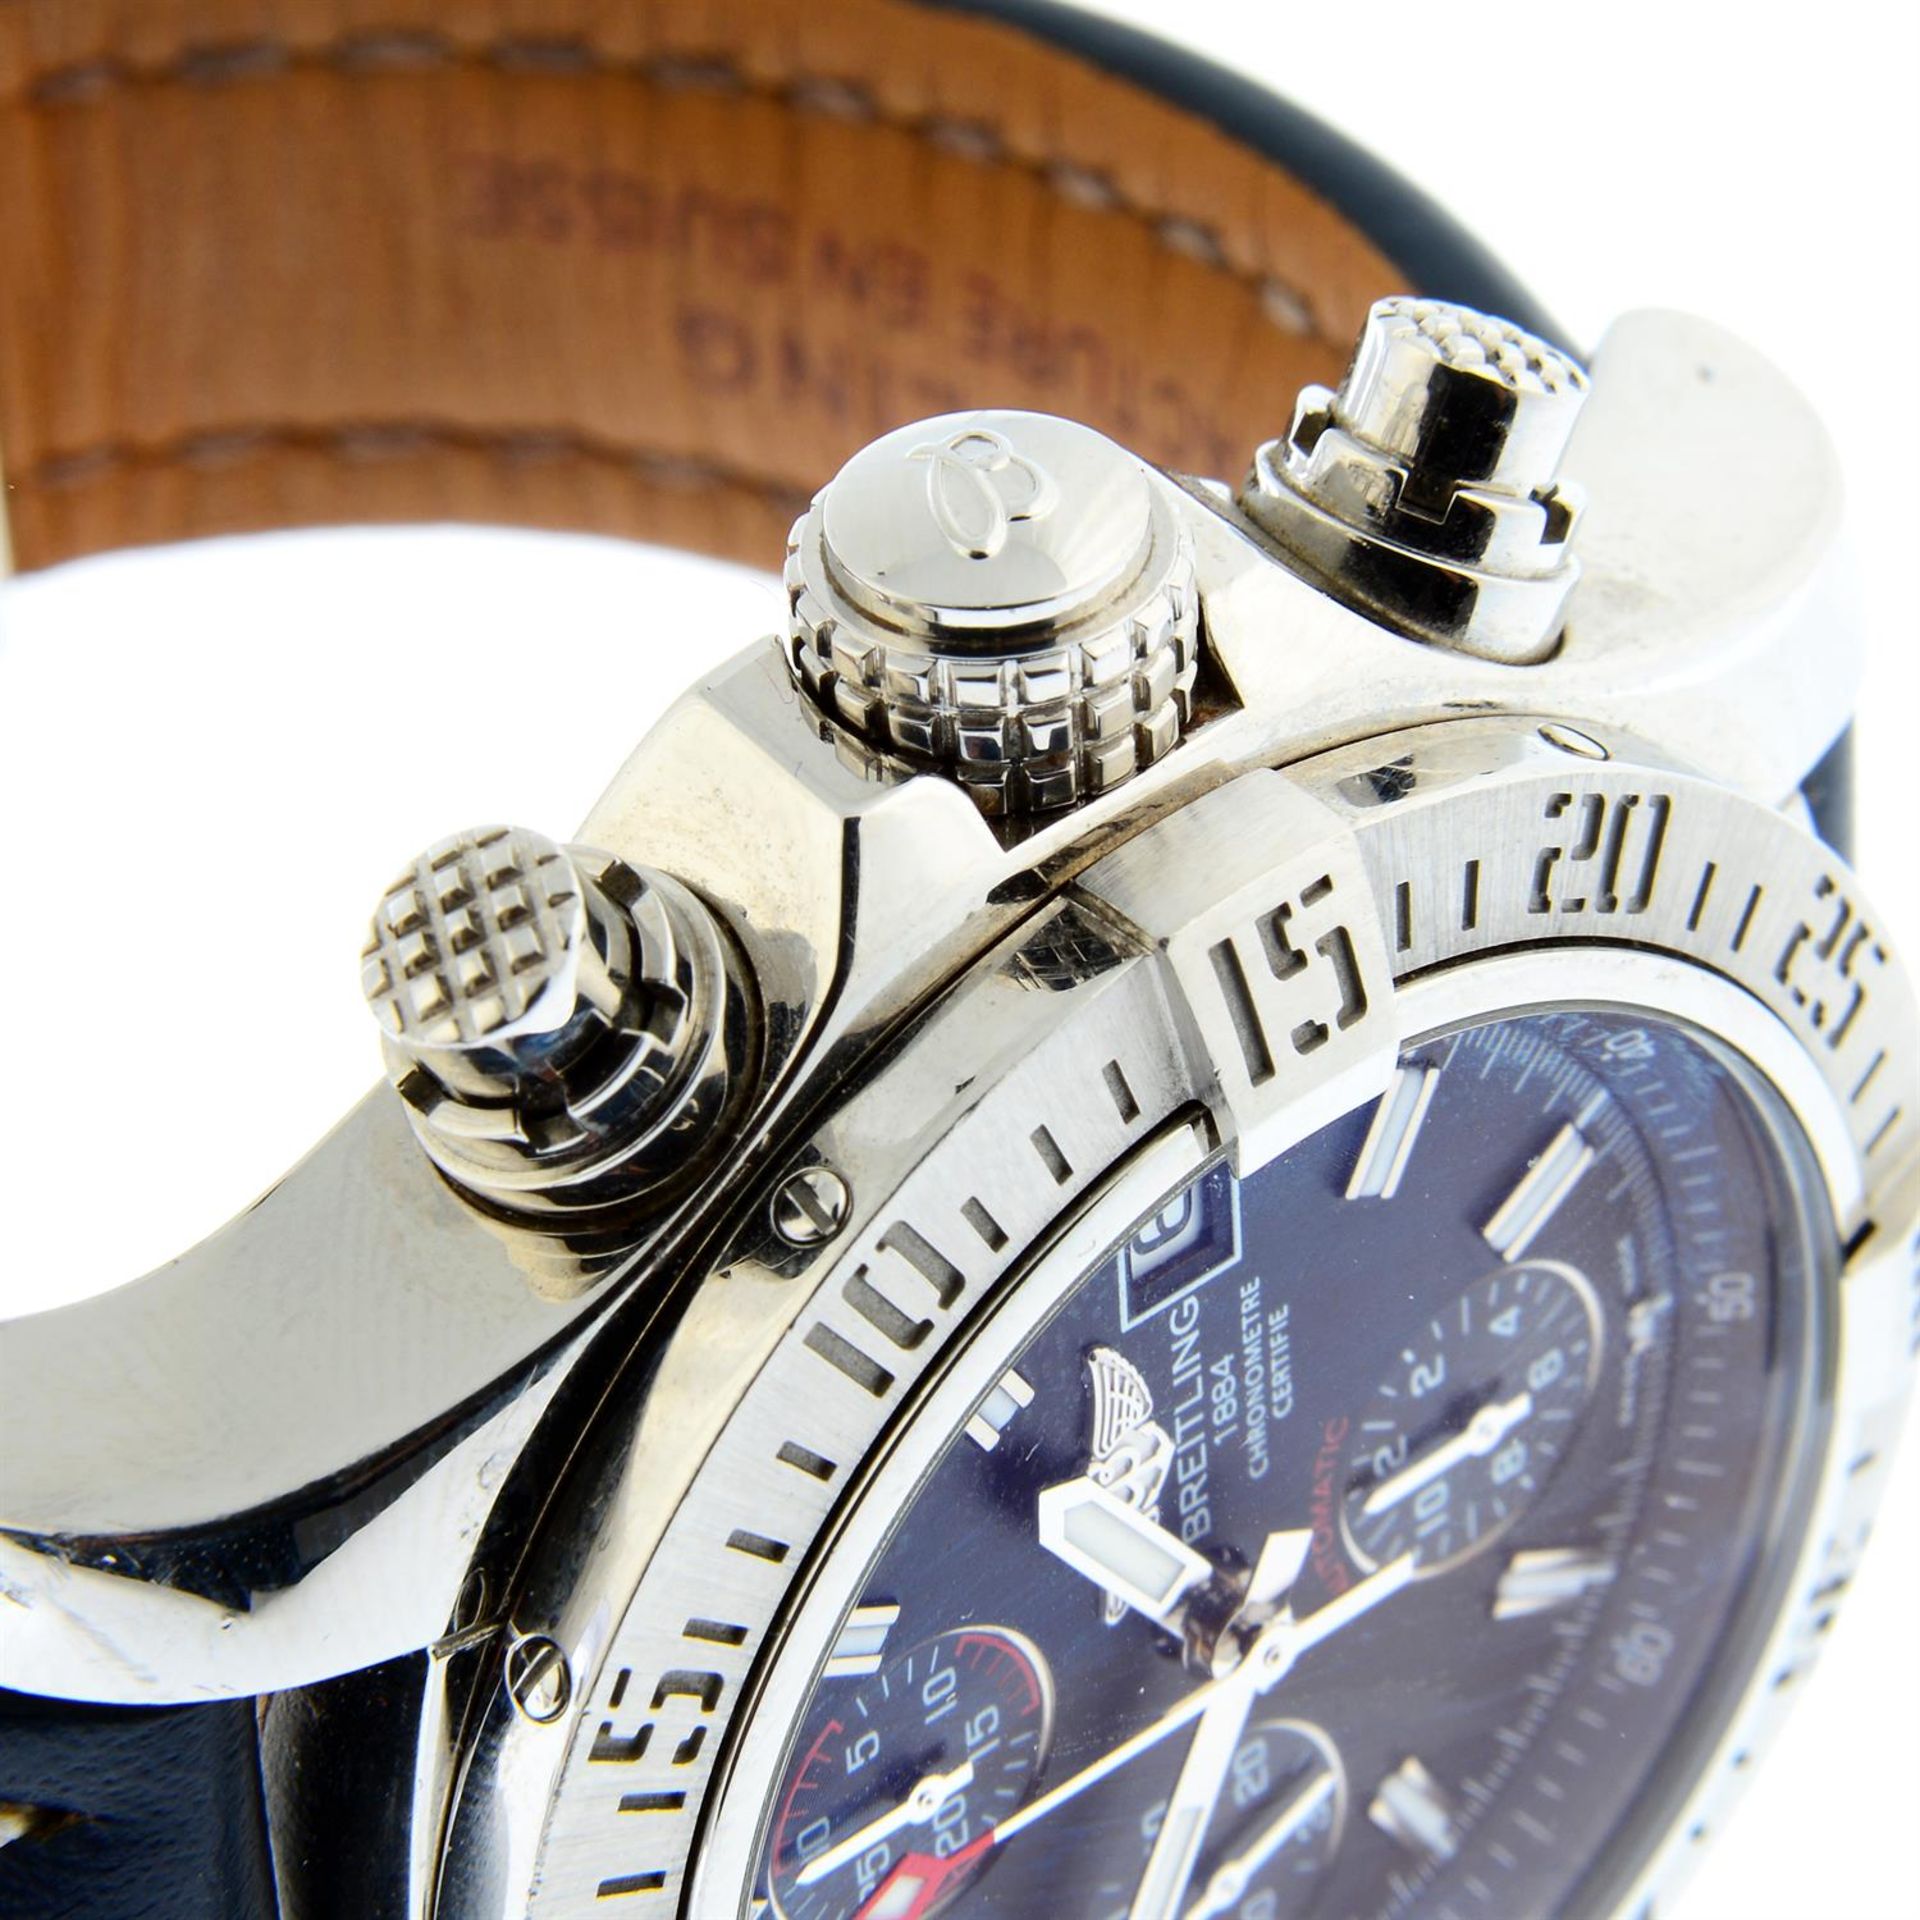 BREITLING - a stainless steel Avenger II chronograph wrist watch, 43mm. - Image 4 of 5